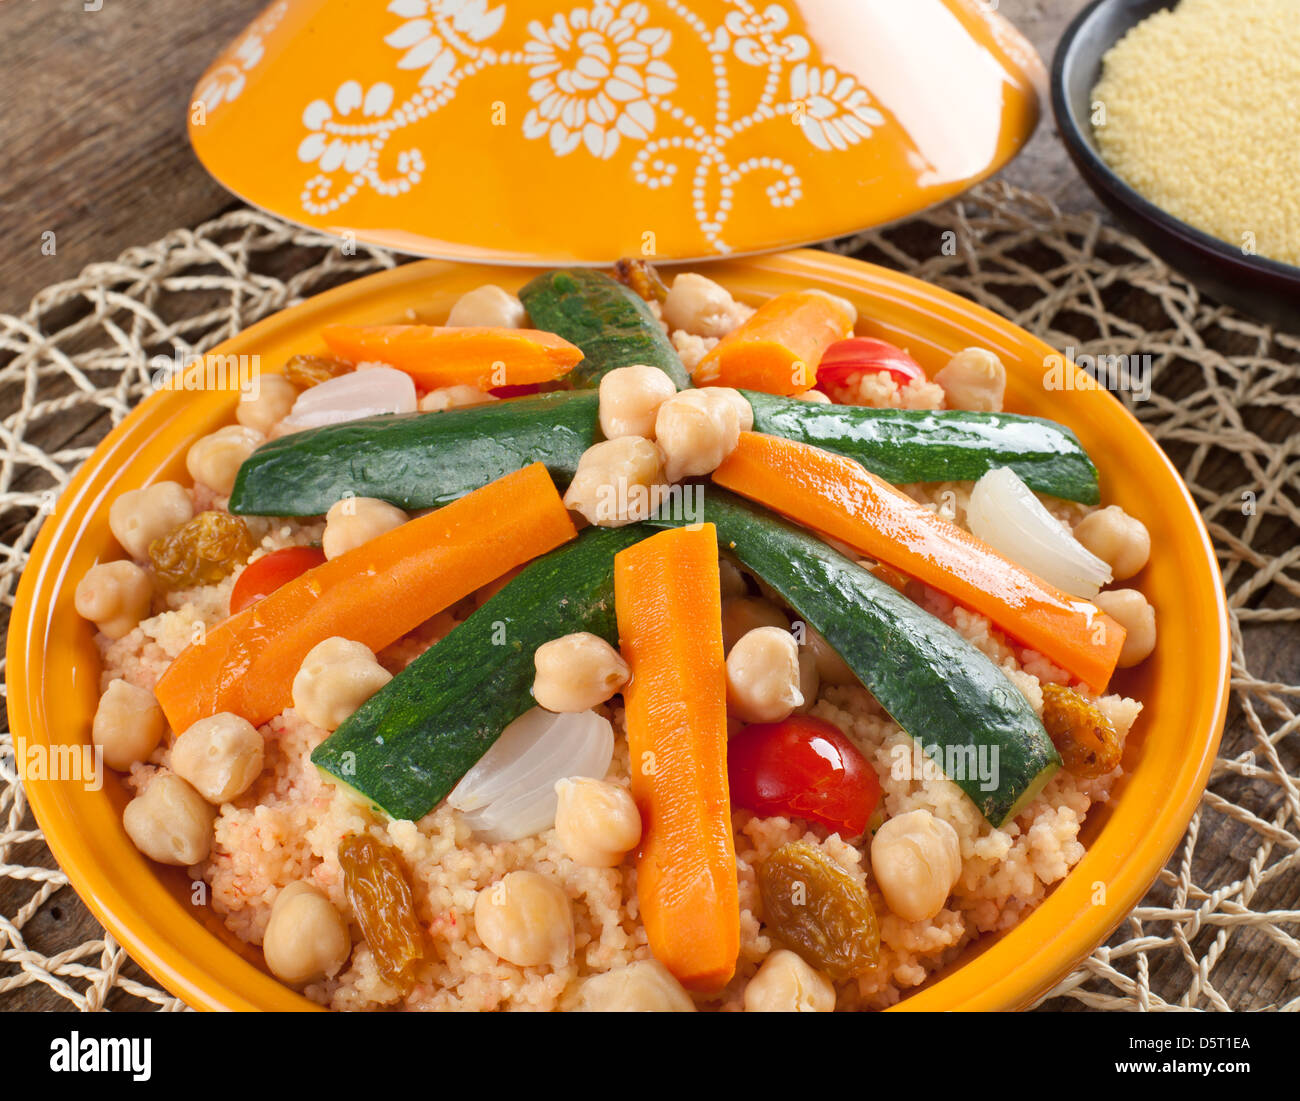 Vegetable Tajine with cous cous Stock Photo